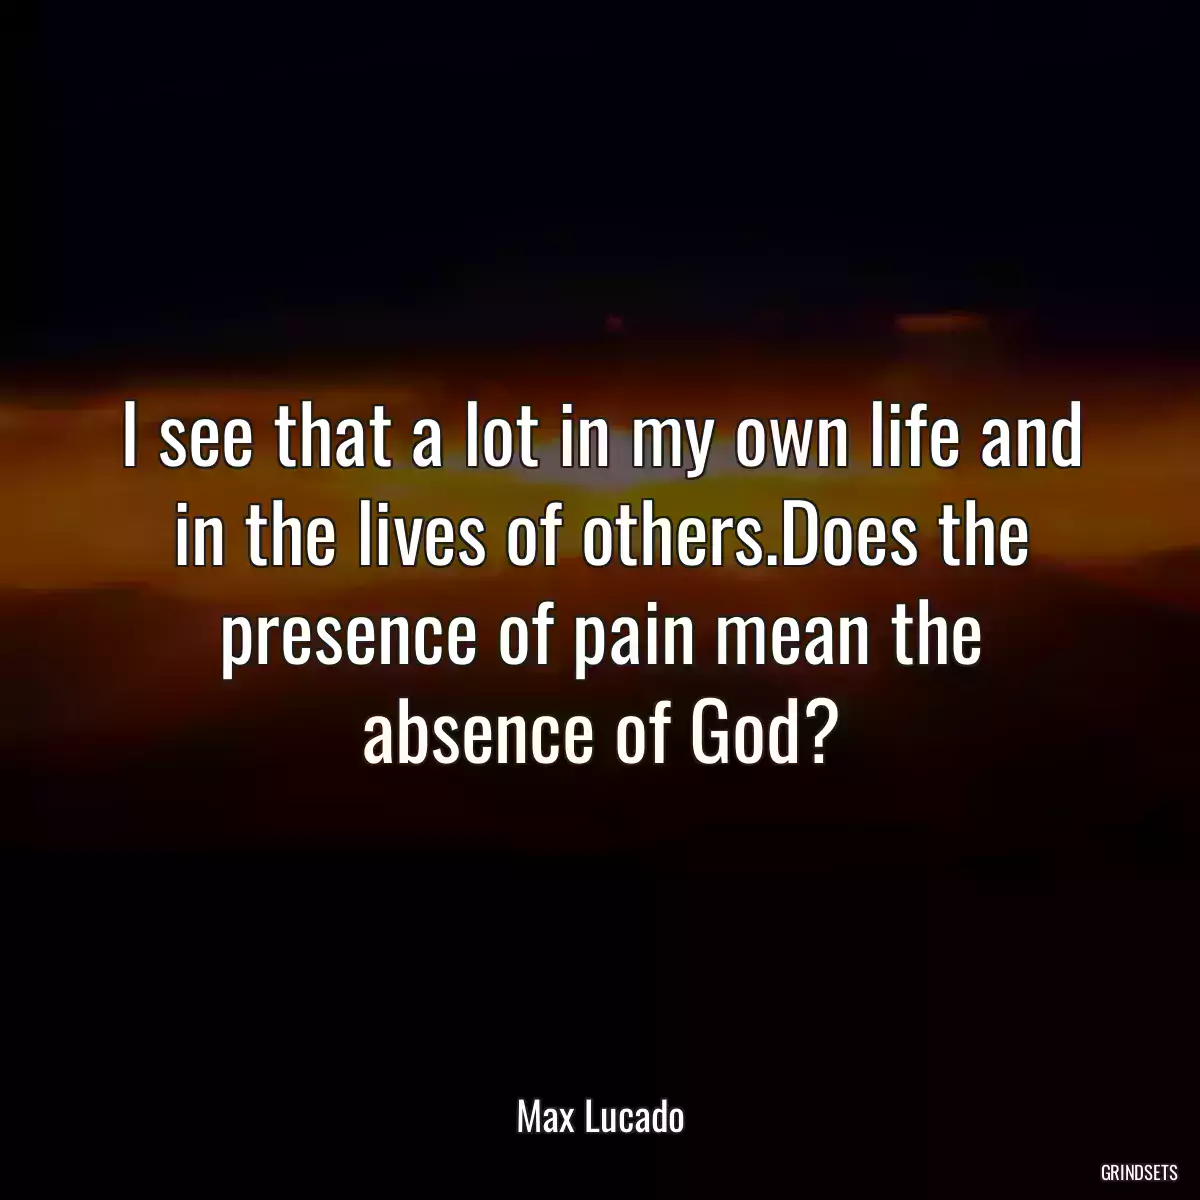 I see that a lot in my own life and in the lives of others.Does the presence of pain mean the absence of God?